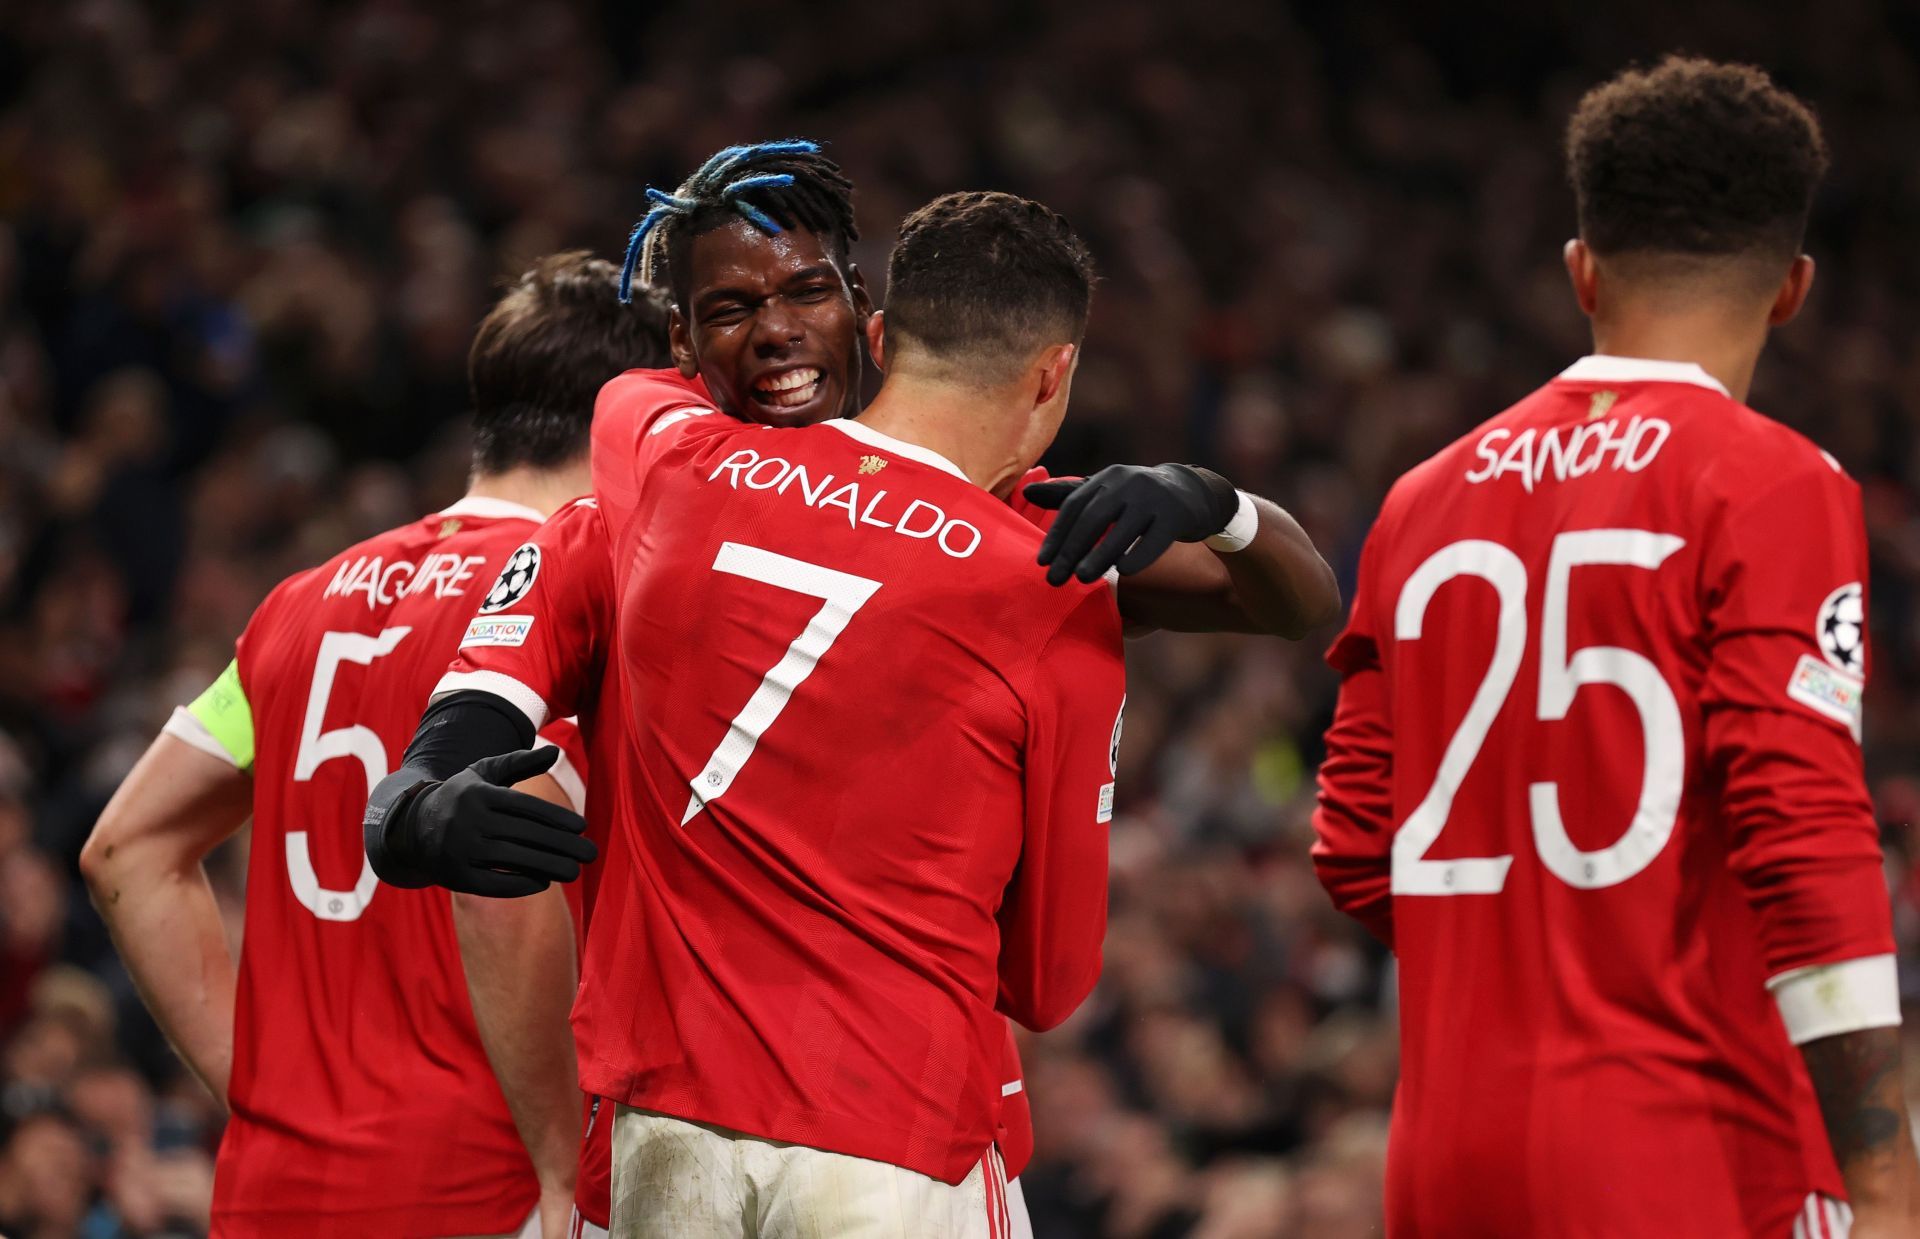 Manchester United superstars Paul Pogba and Cristiano Ronaldo wield considerable influence.